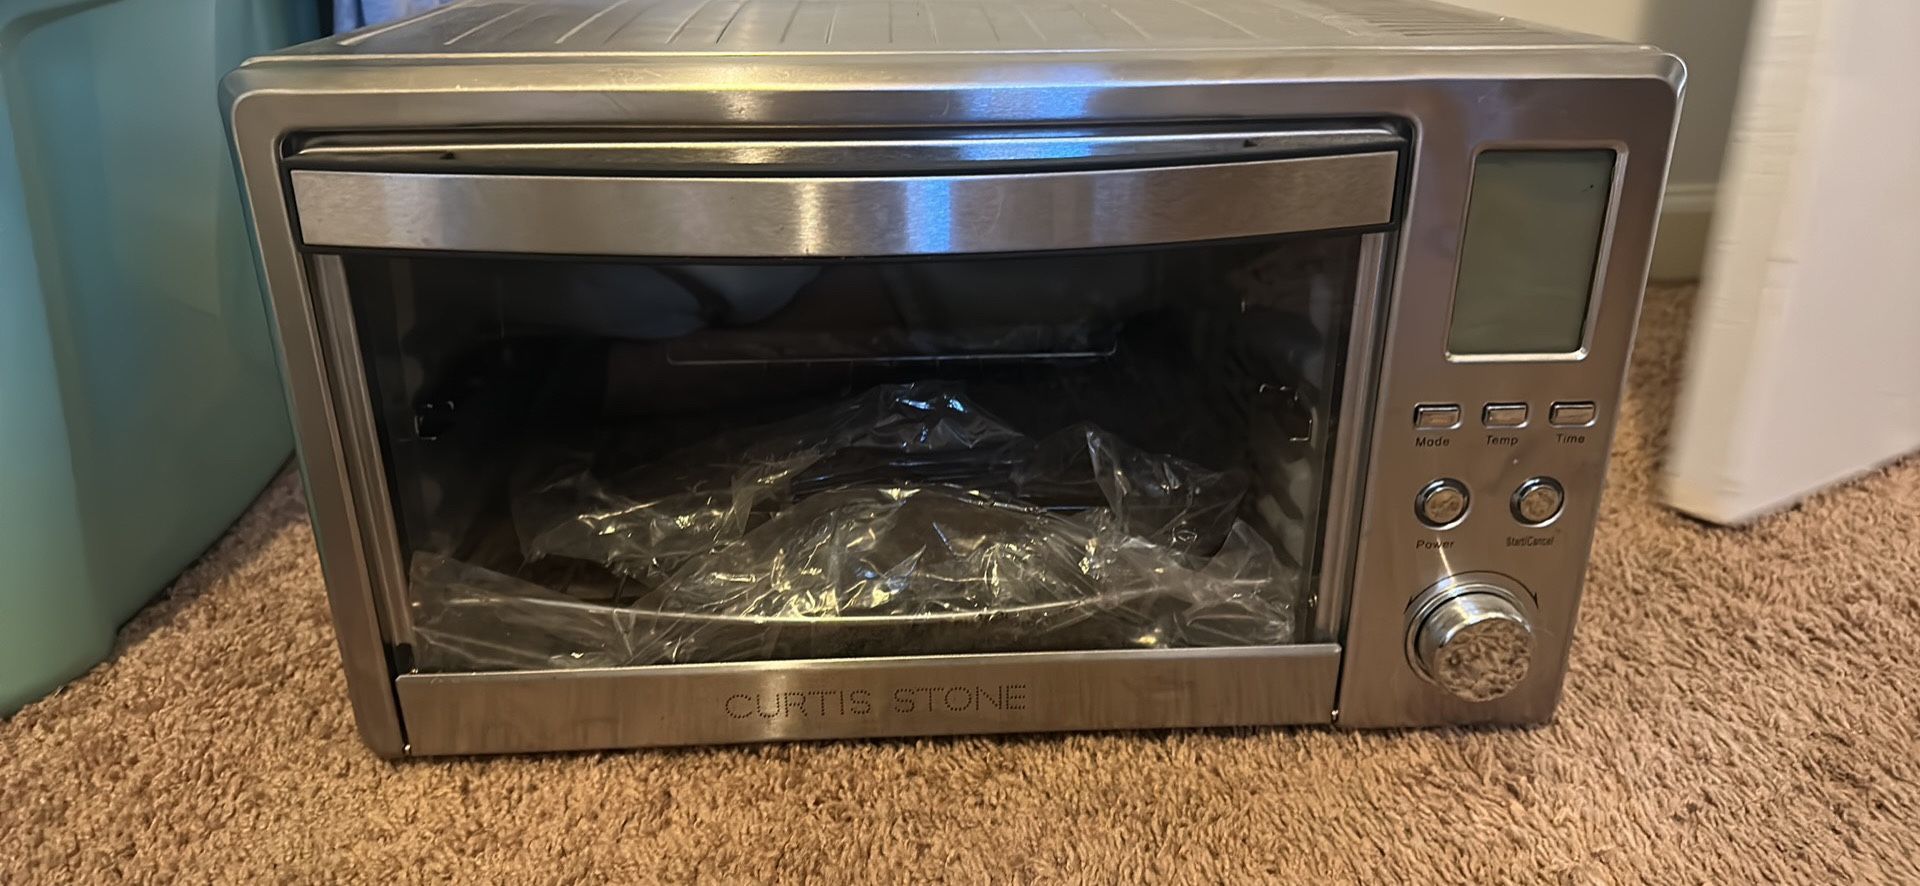 Curtis Stone Rotisserie And Convection Oven 